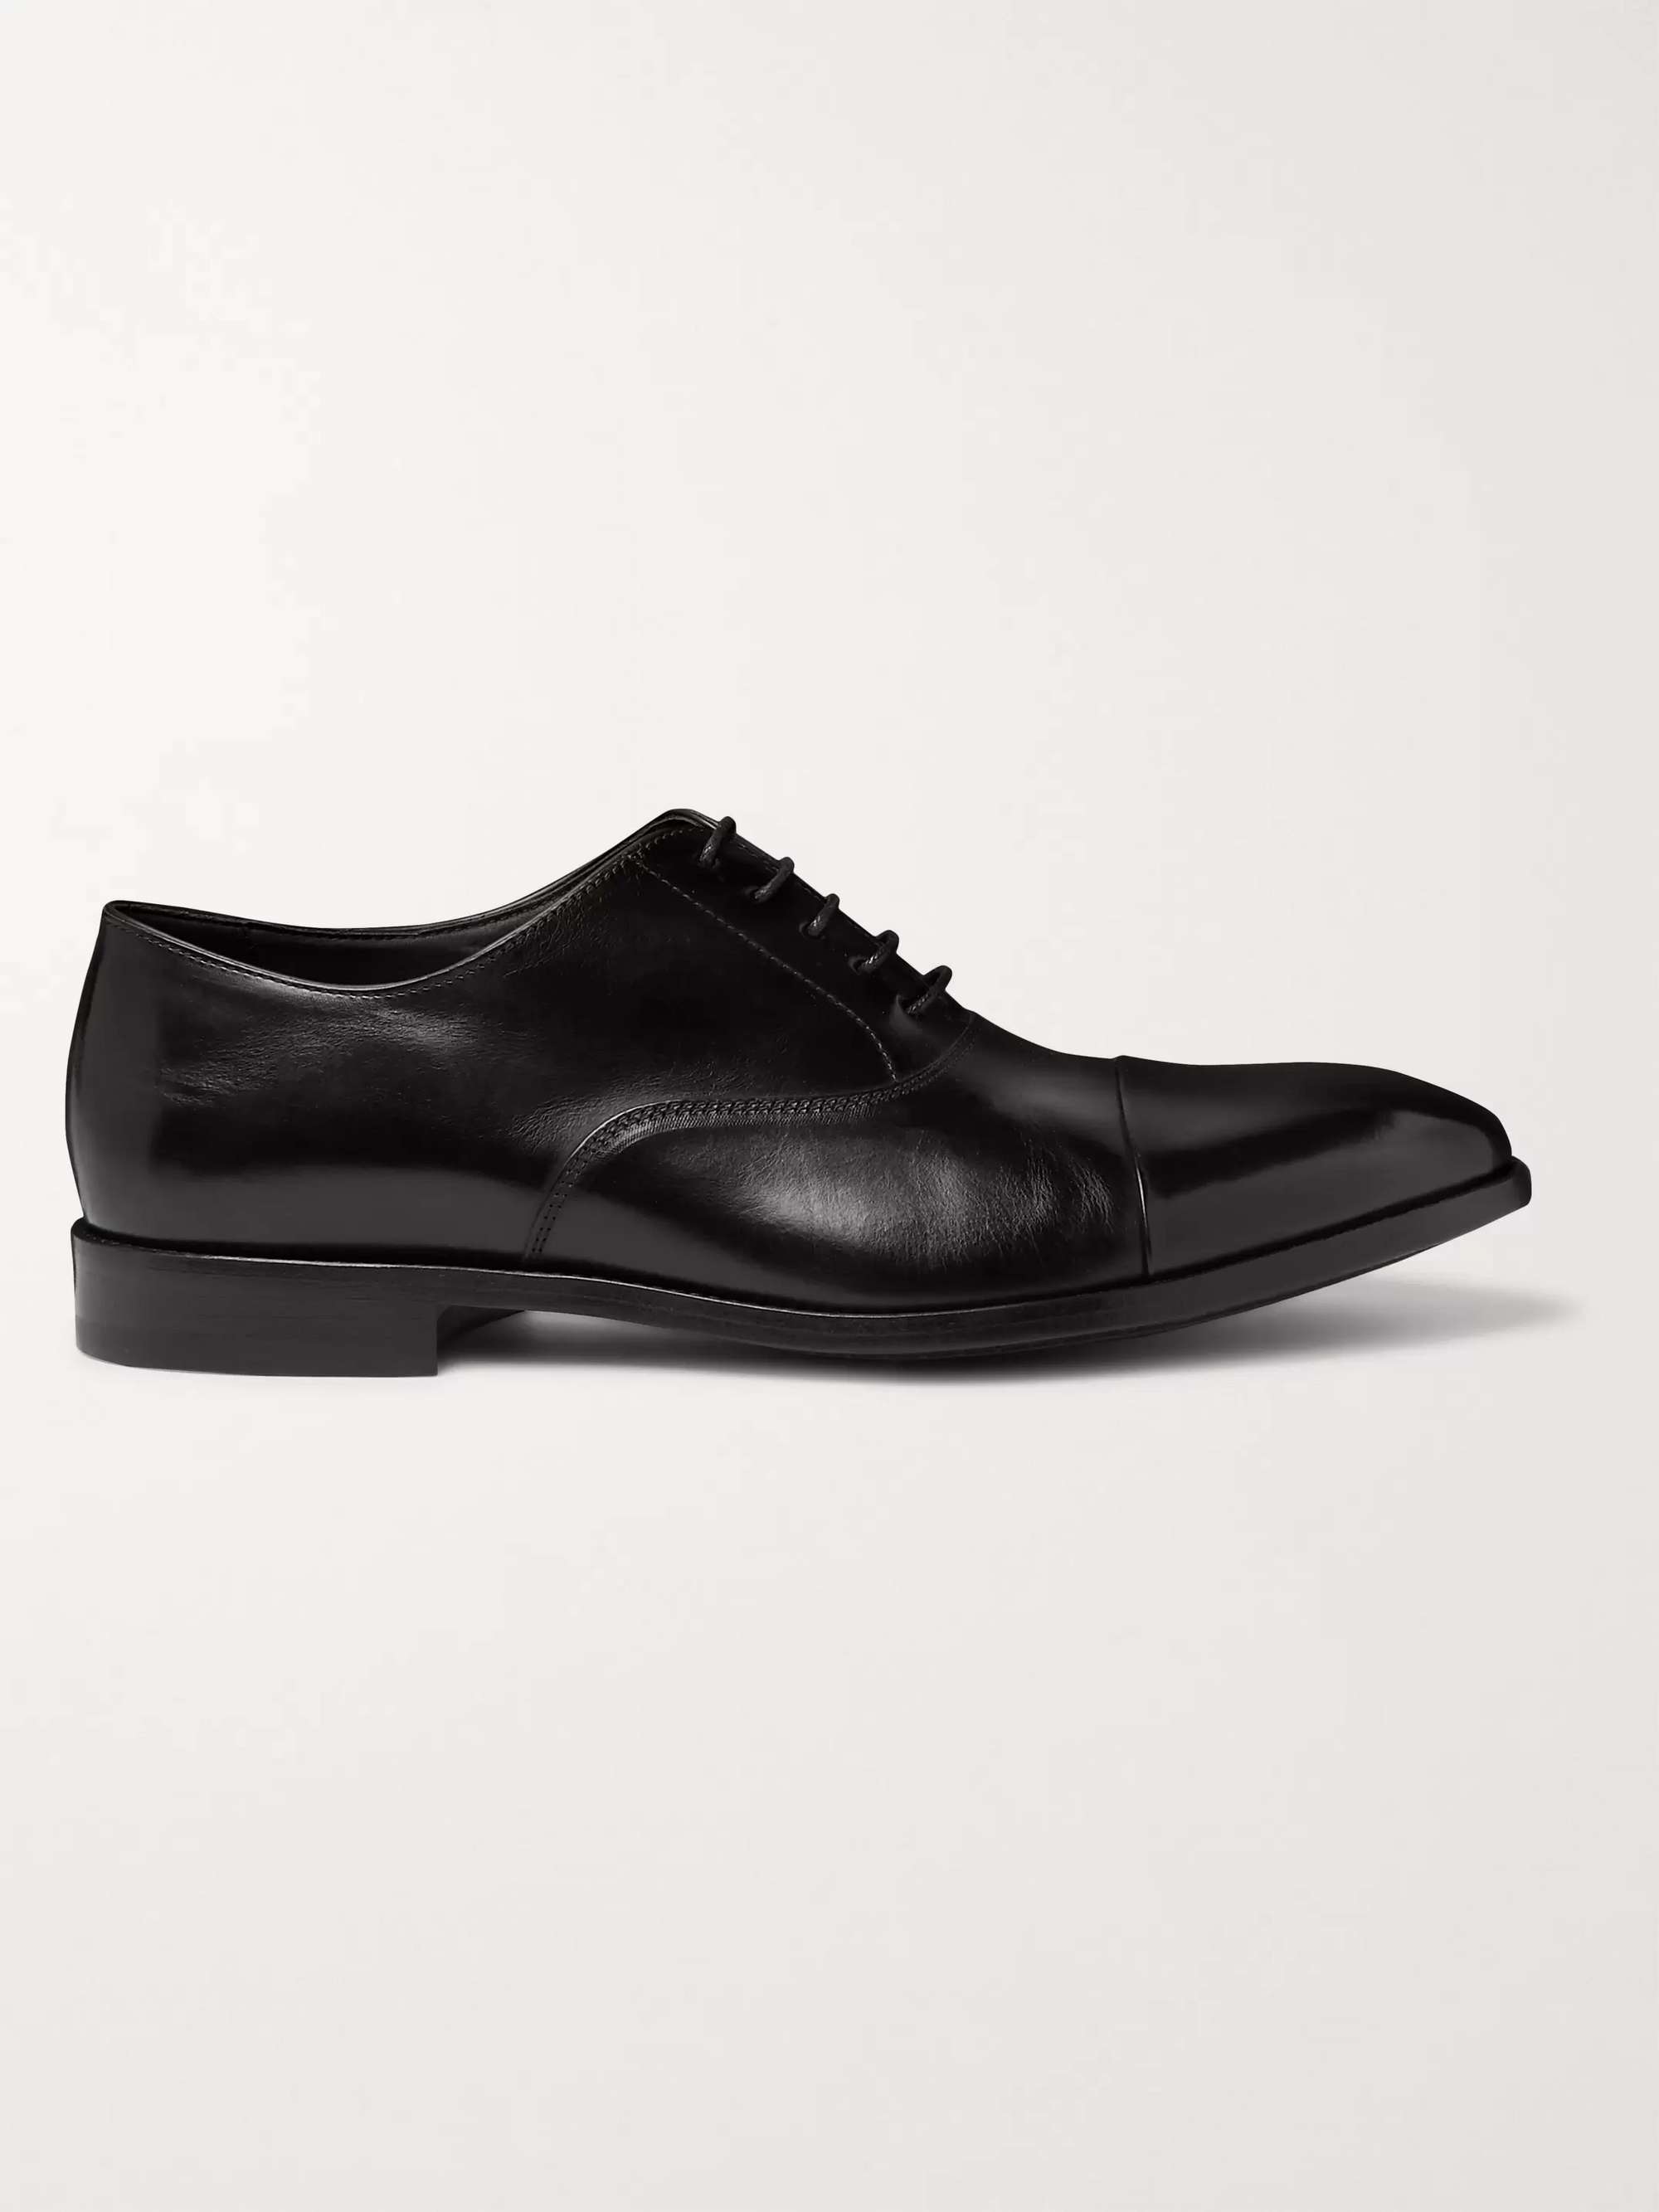 PAUL SMITH Brent Leather Oxford Shoes for Men | MR PORTER